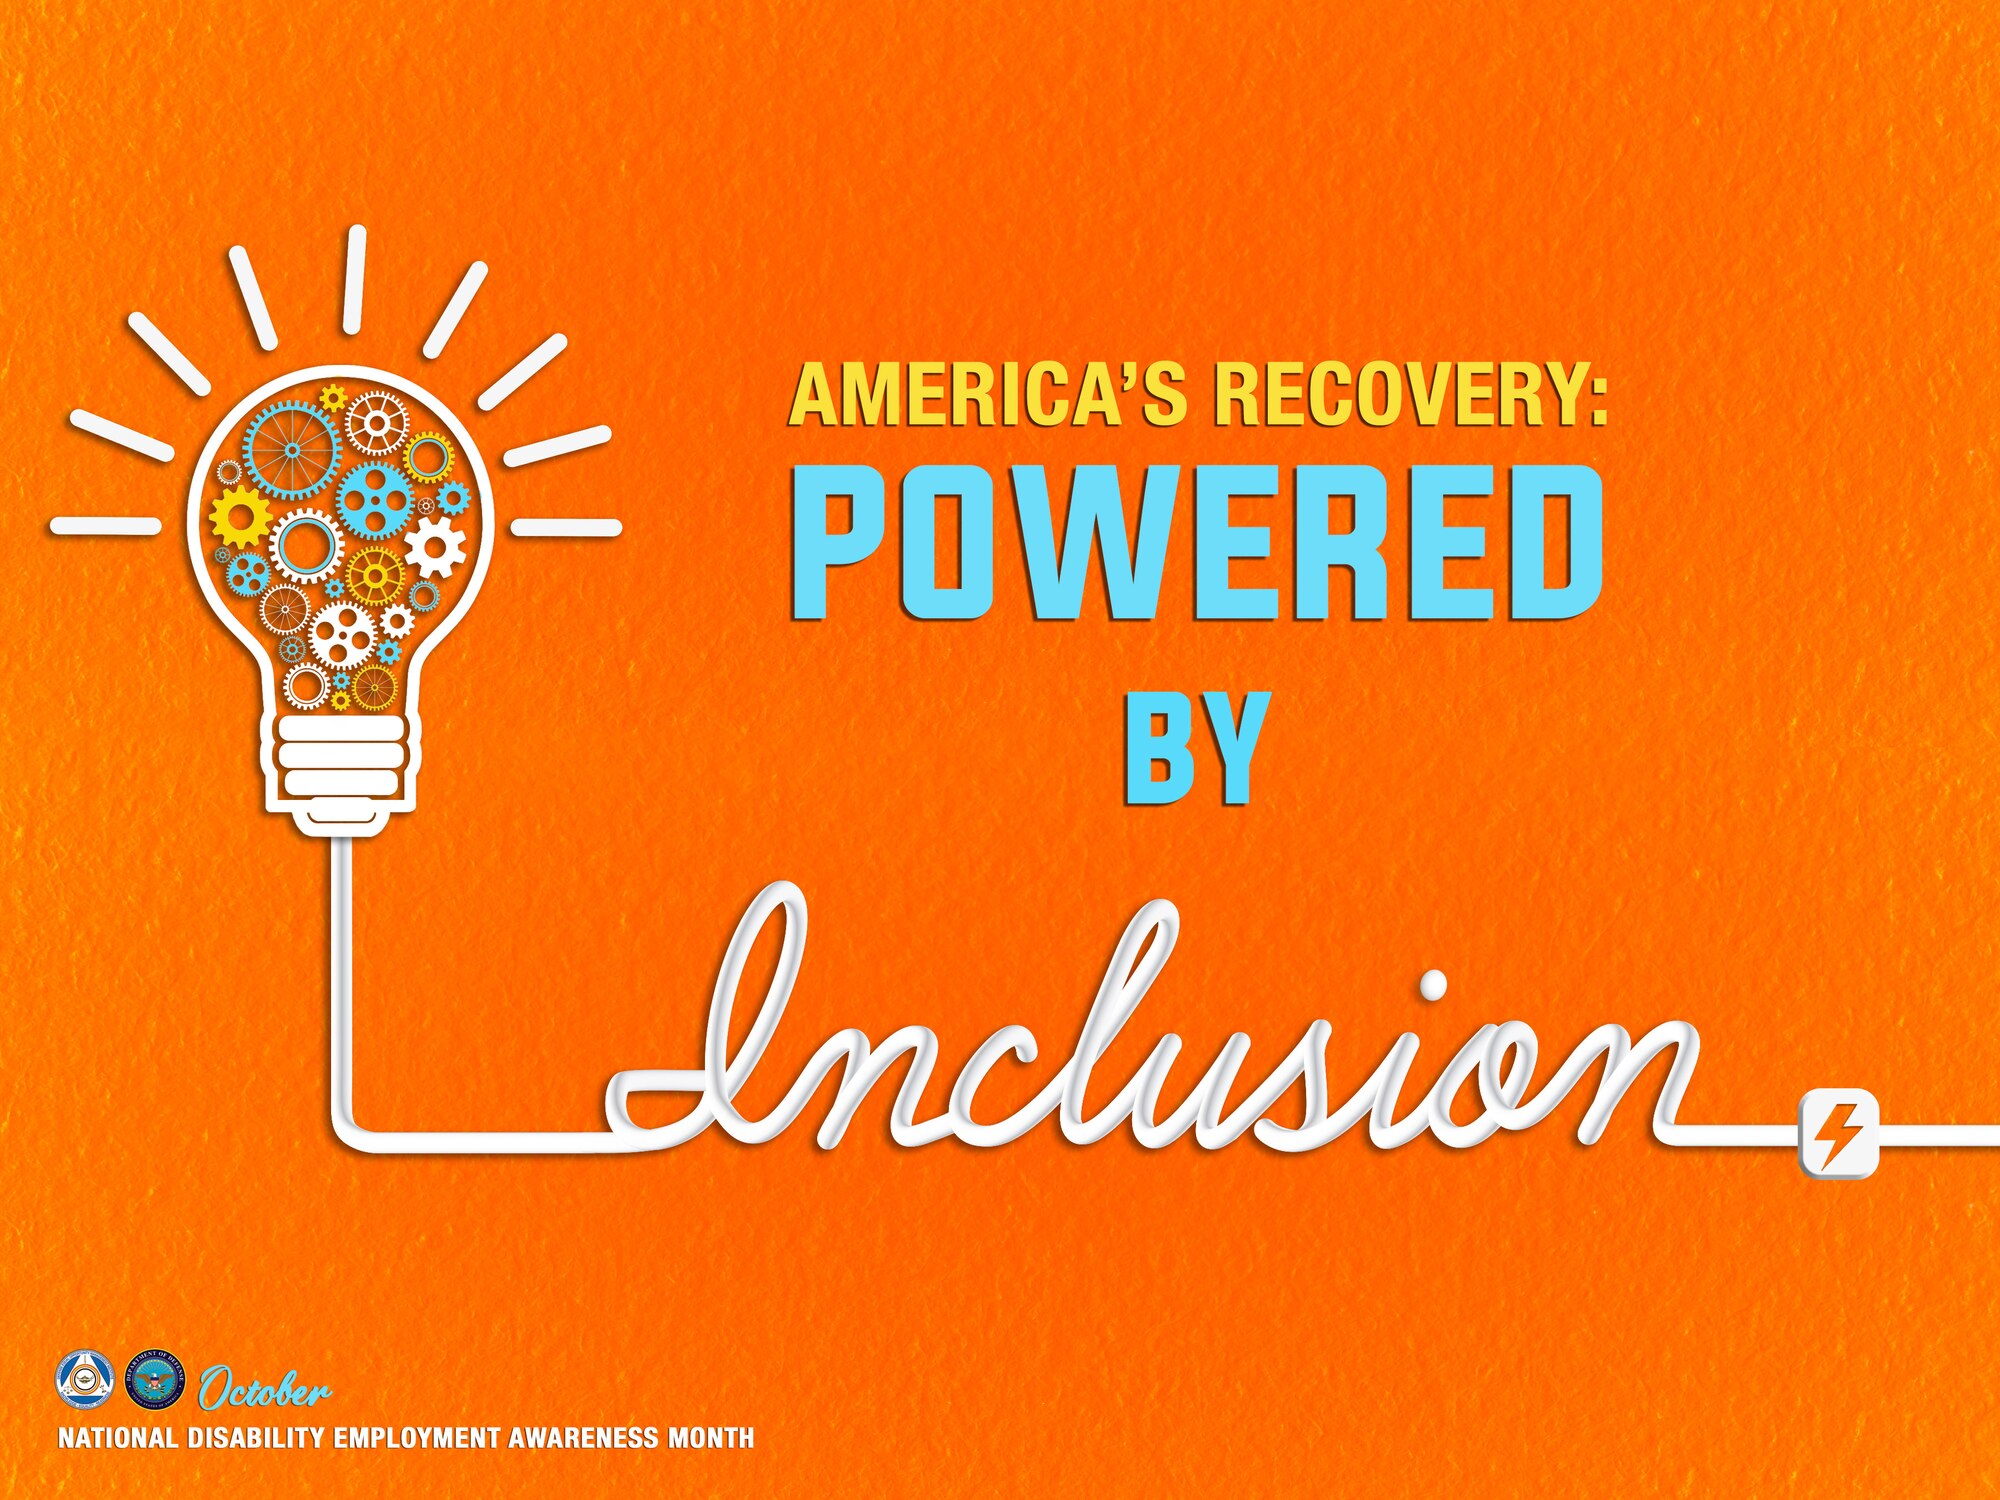 Poster depicting the words American's Recover Power by Inclusion on a bright orange background and a image of an lightbulb with images of gear wheels inside the bulb.